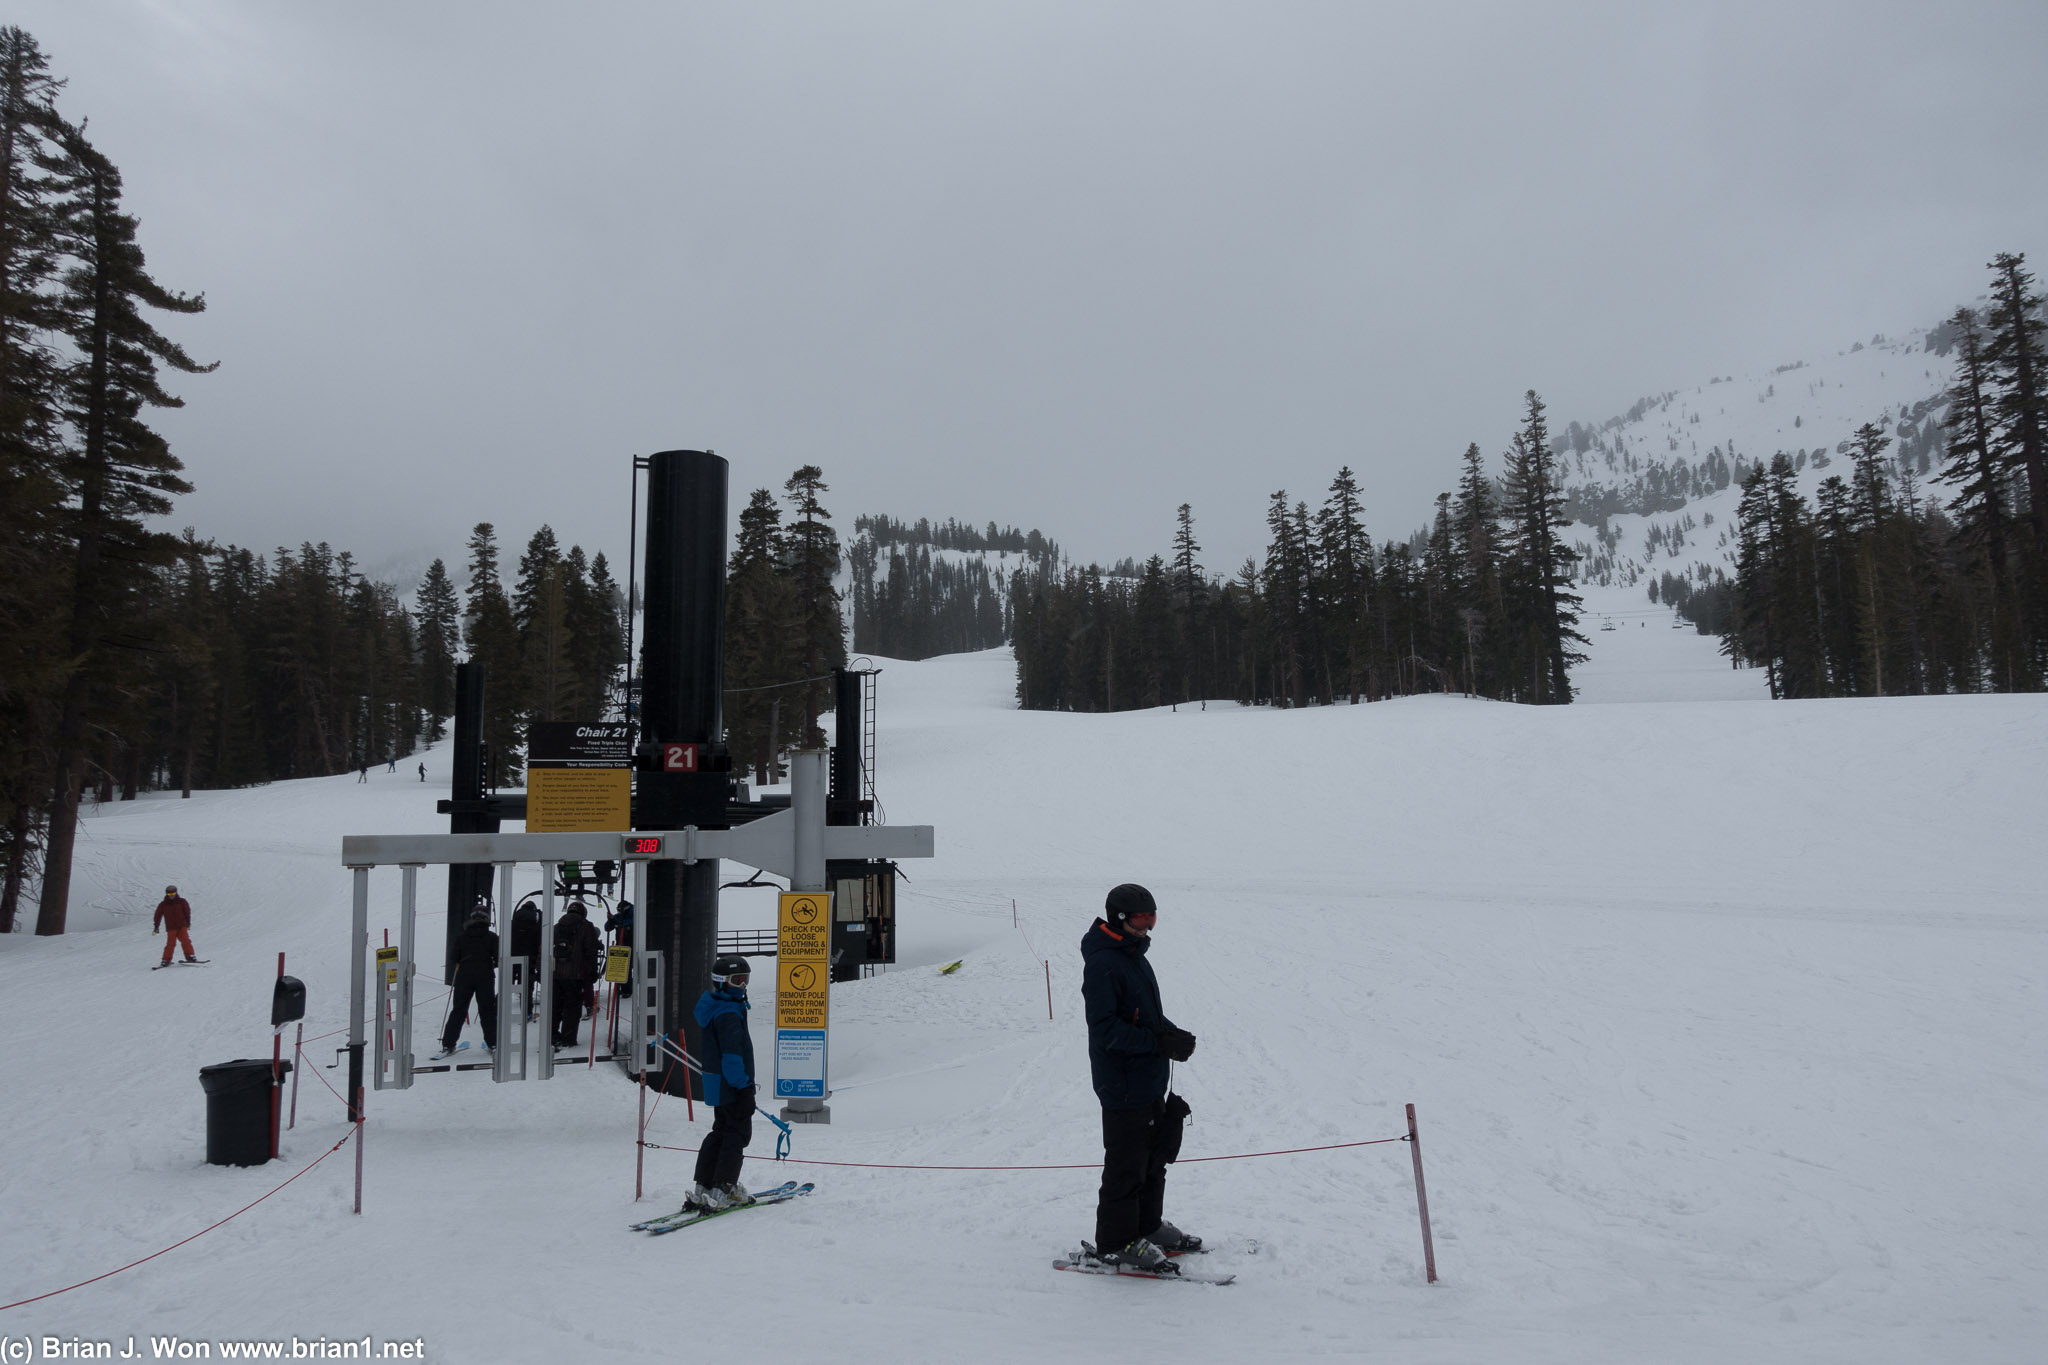 Uh, guys, how about actually getting on said chairlift?